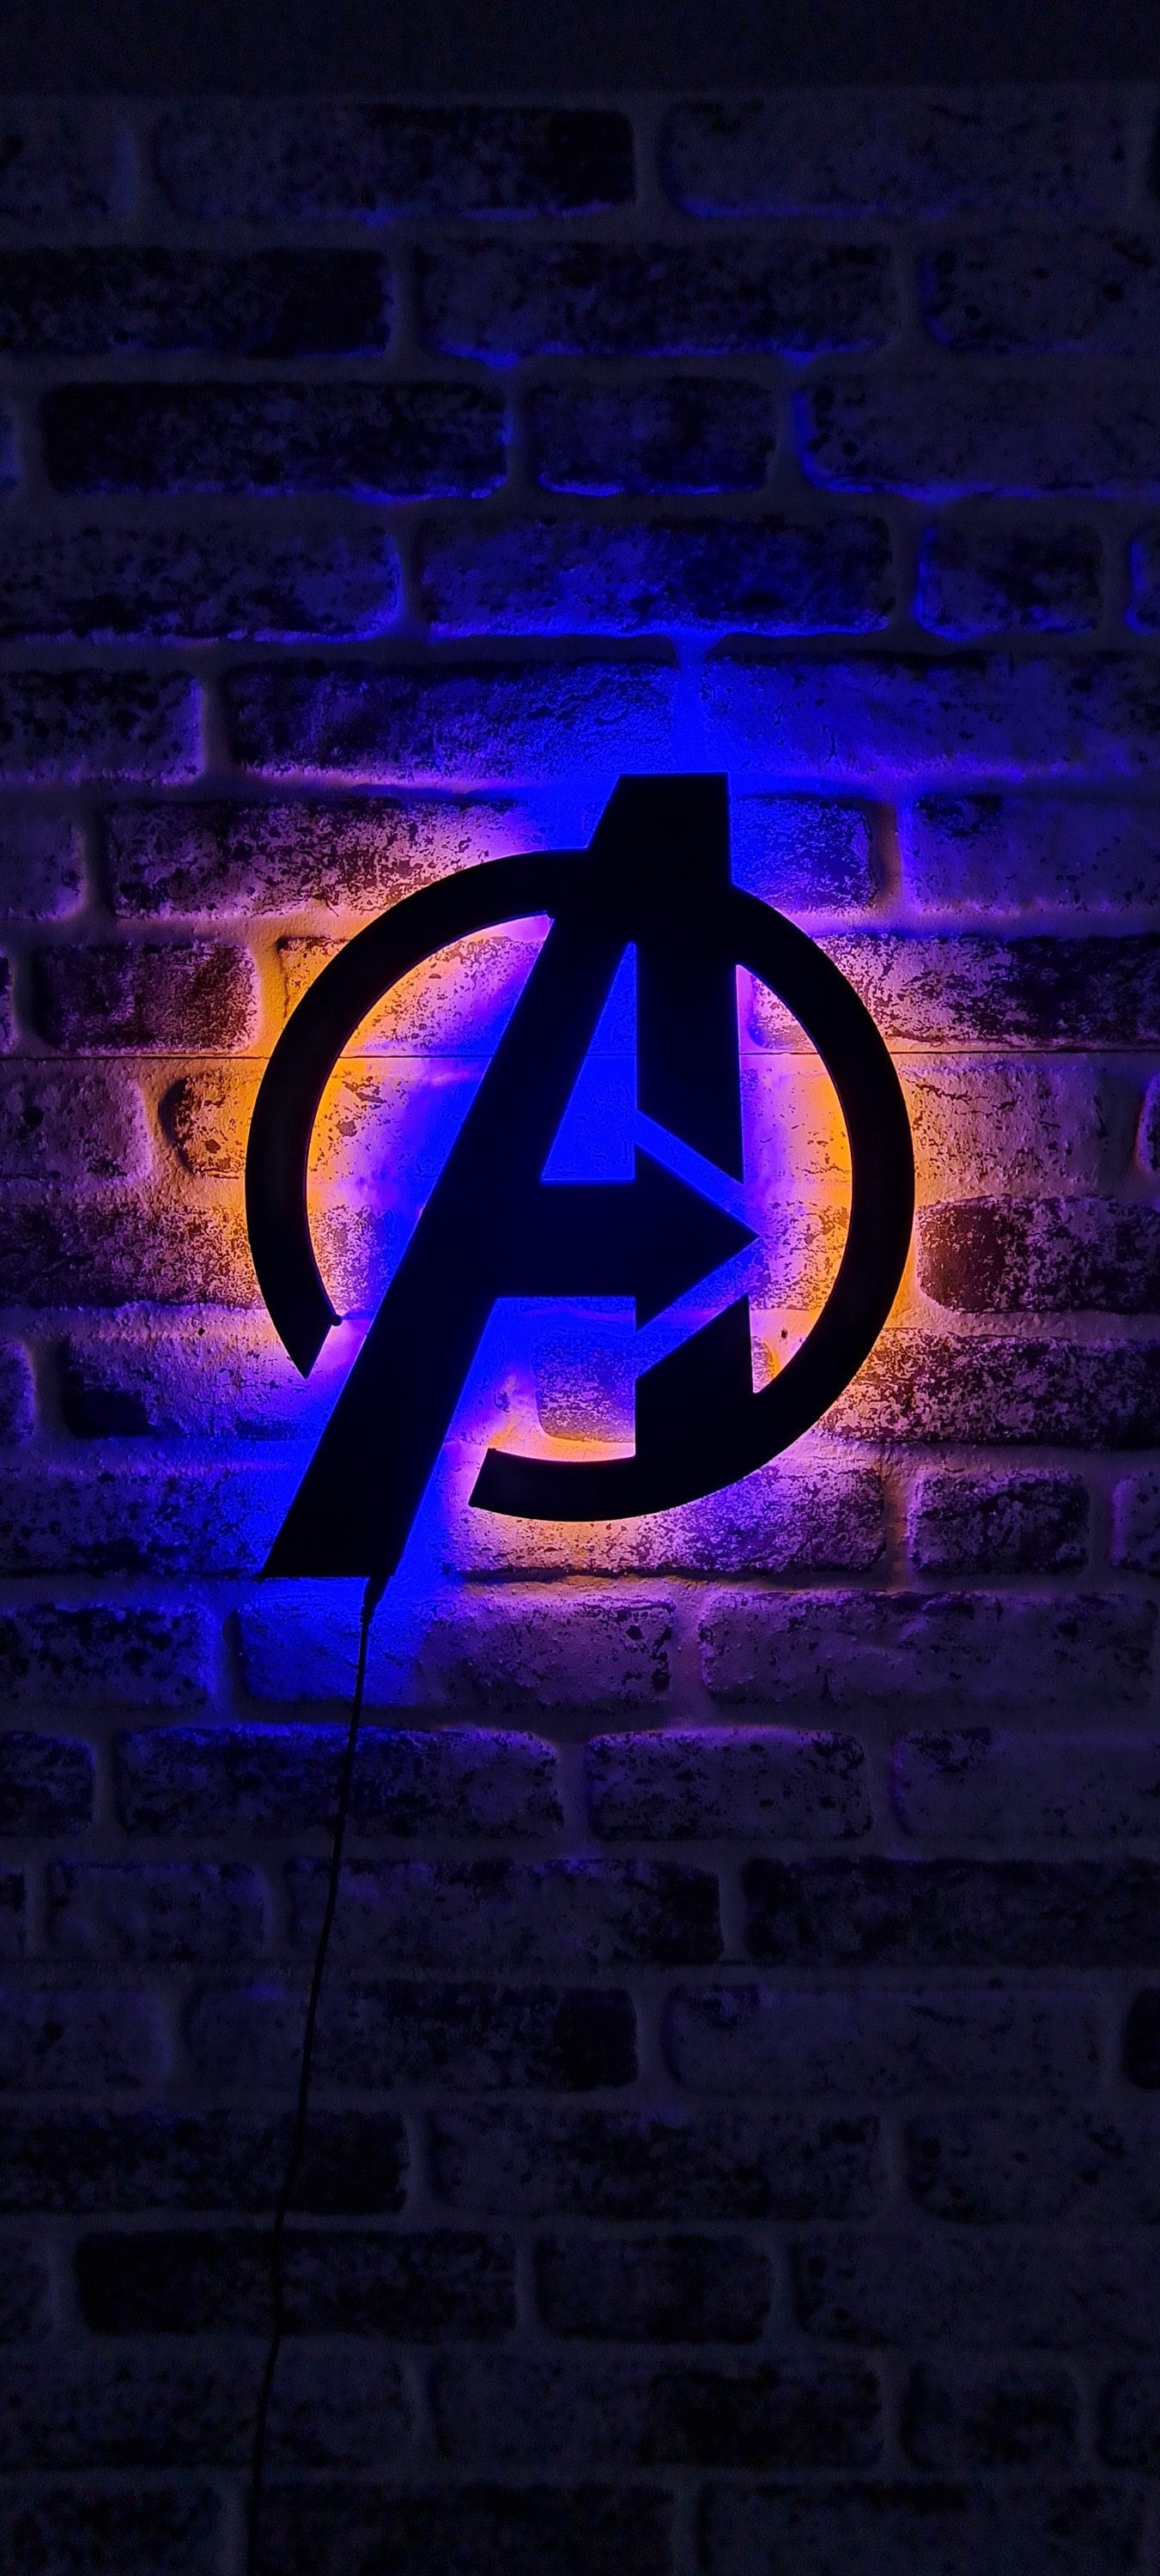 Stark Industries neon' Poster, picture, metal print, paint by Marvel